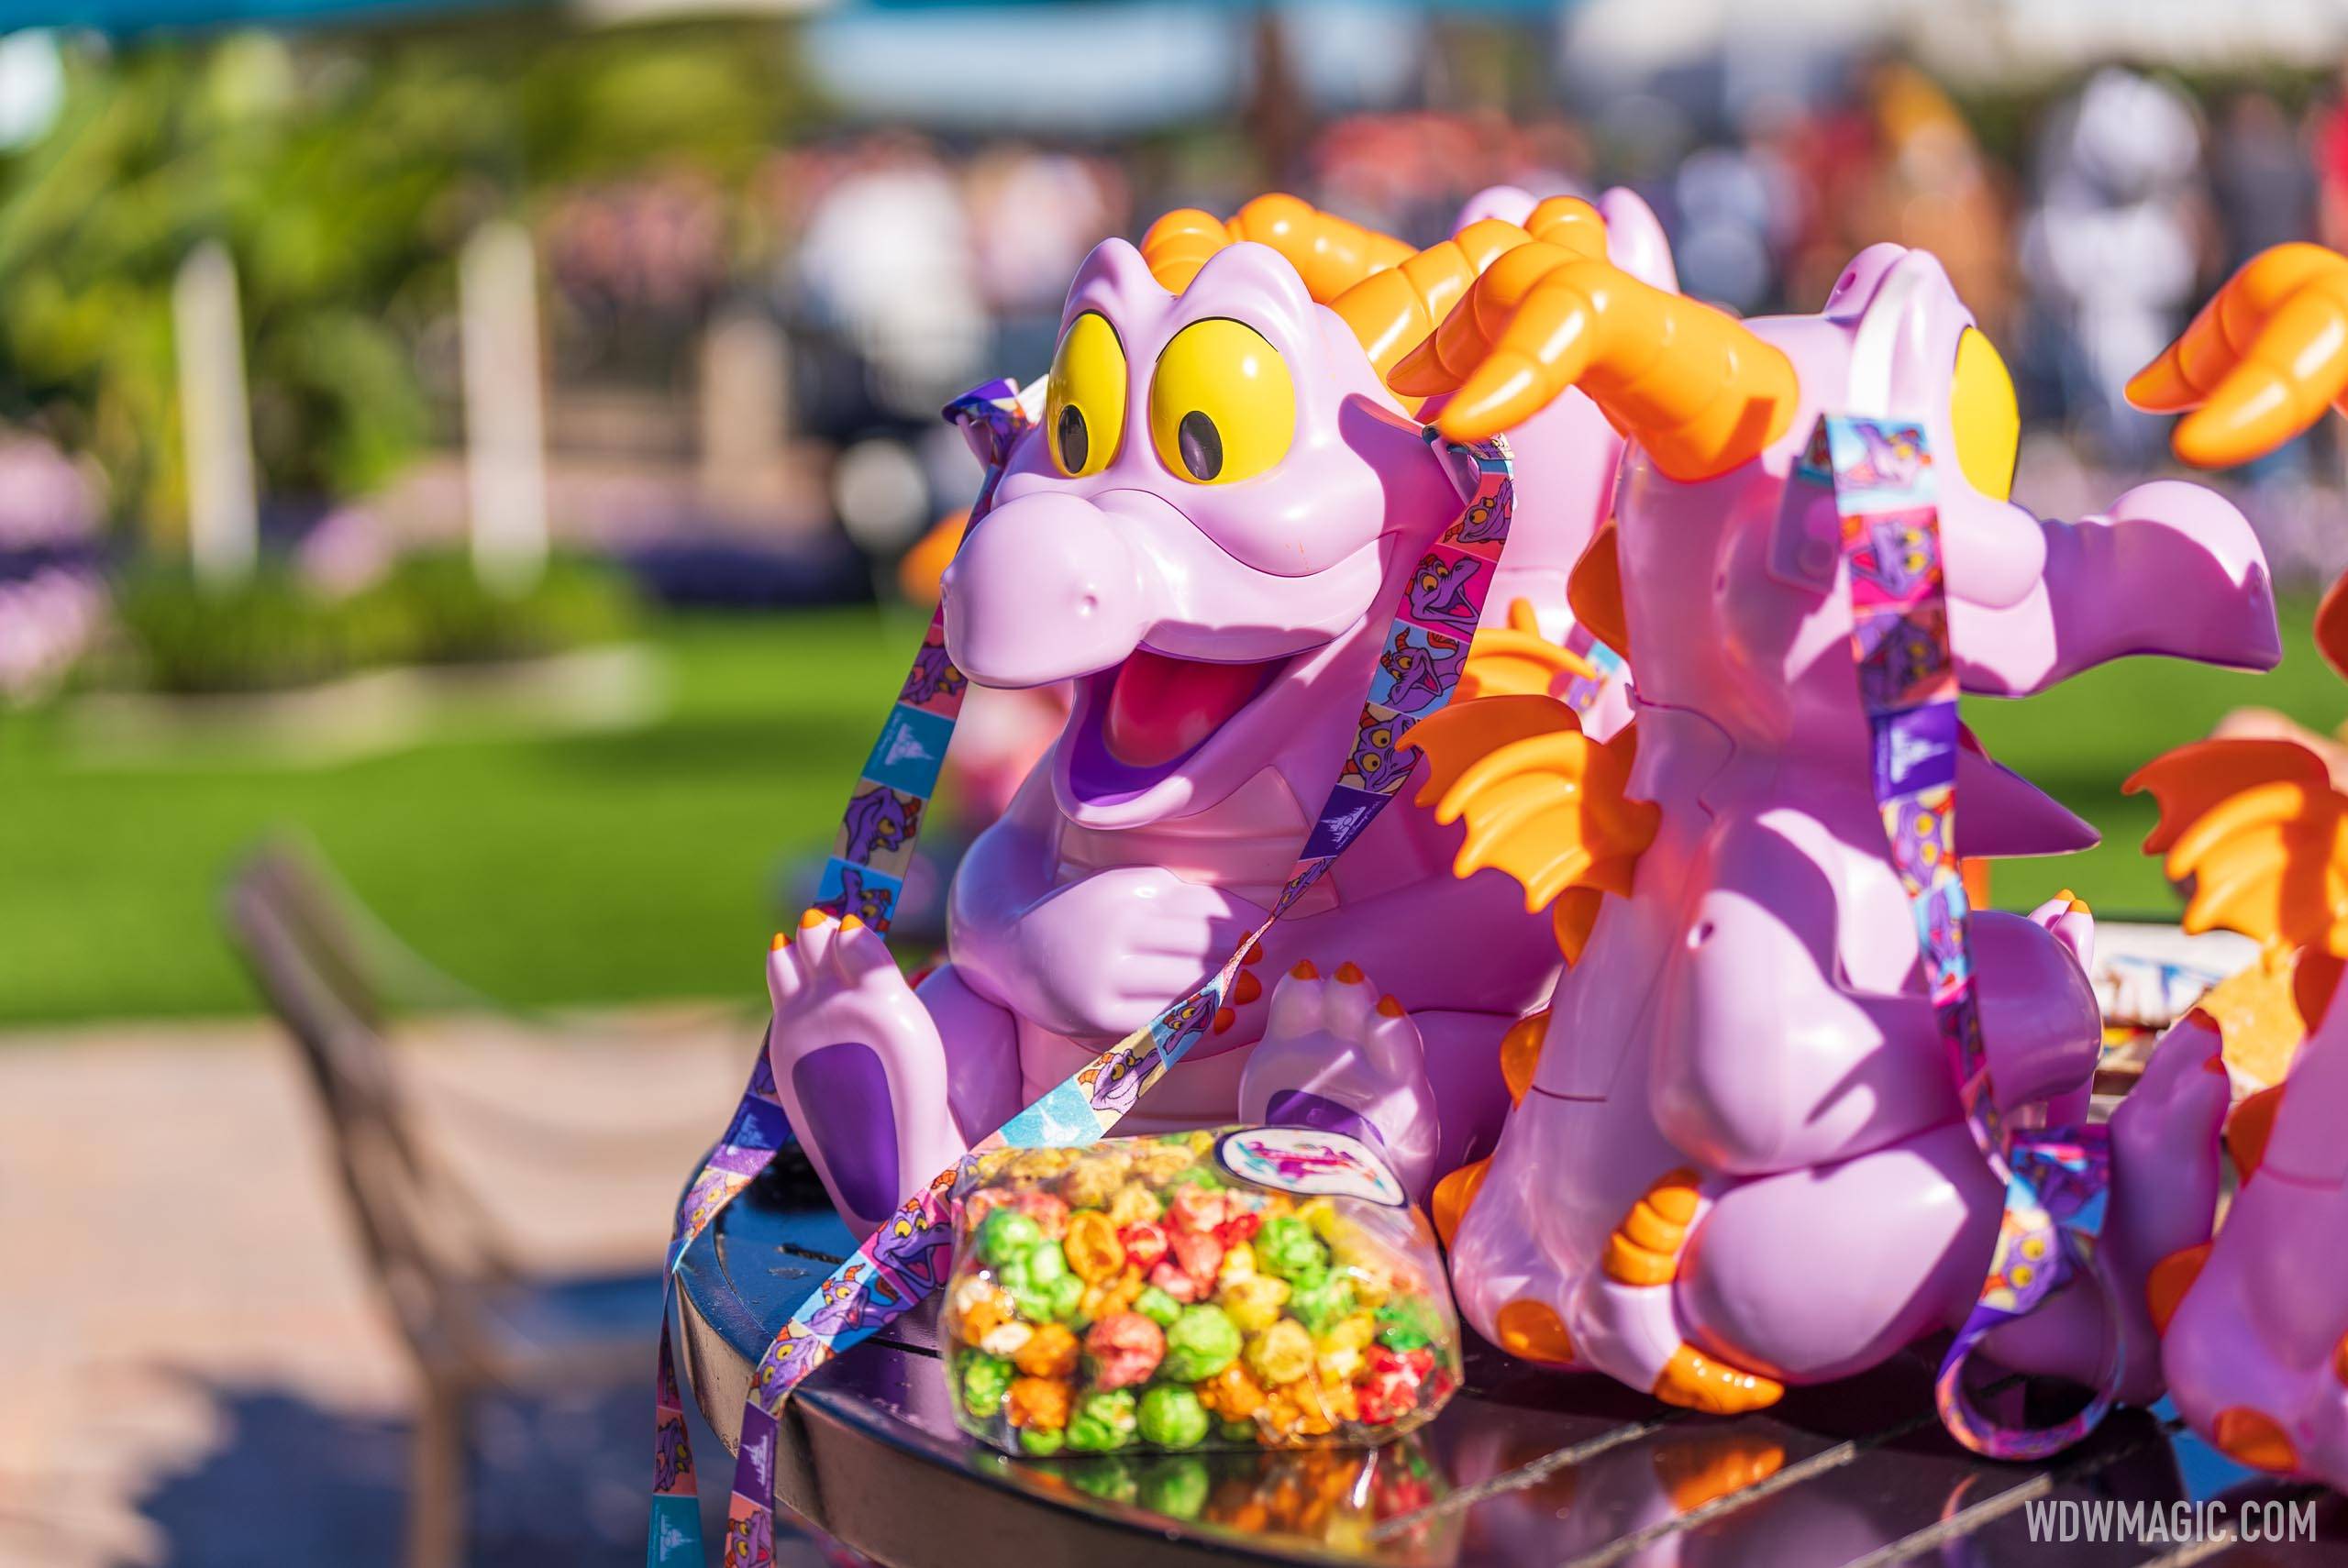 The Figment Premium Popcorn Bucket is back in stock at EPCOT with a much easier purchase option